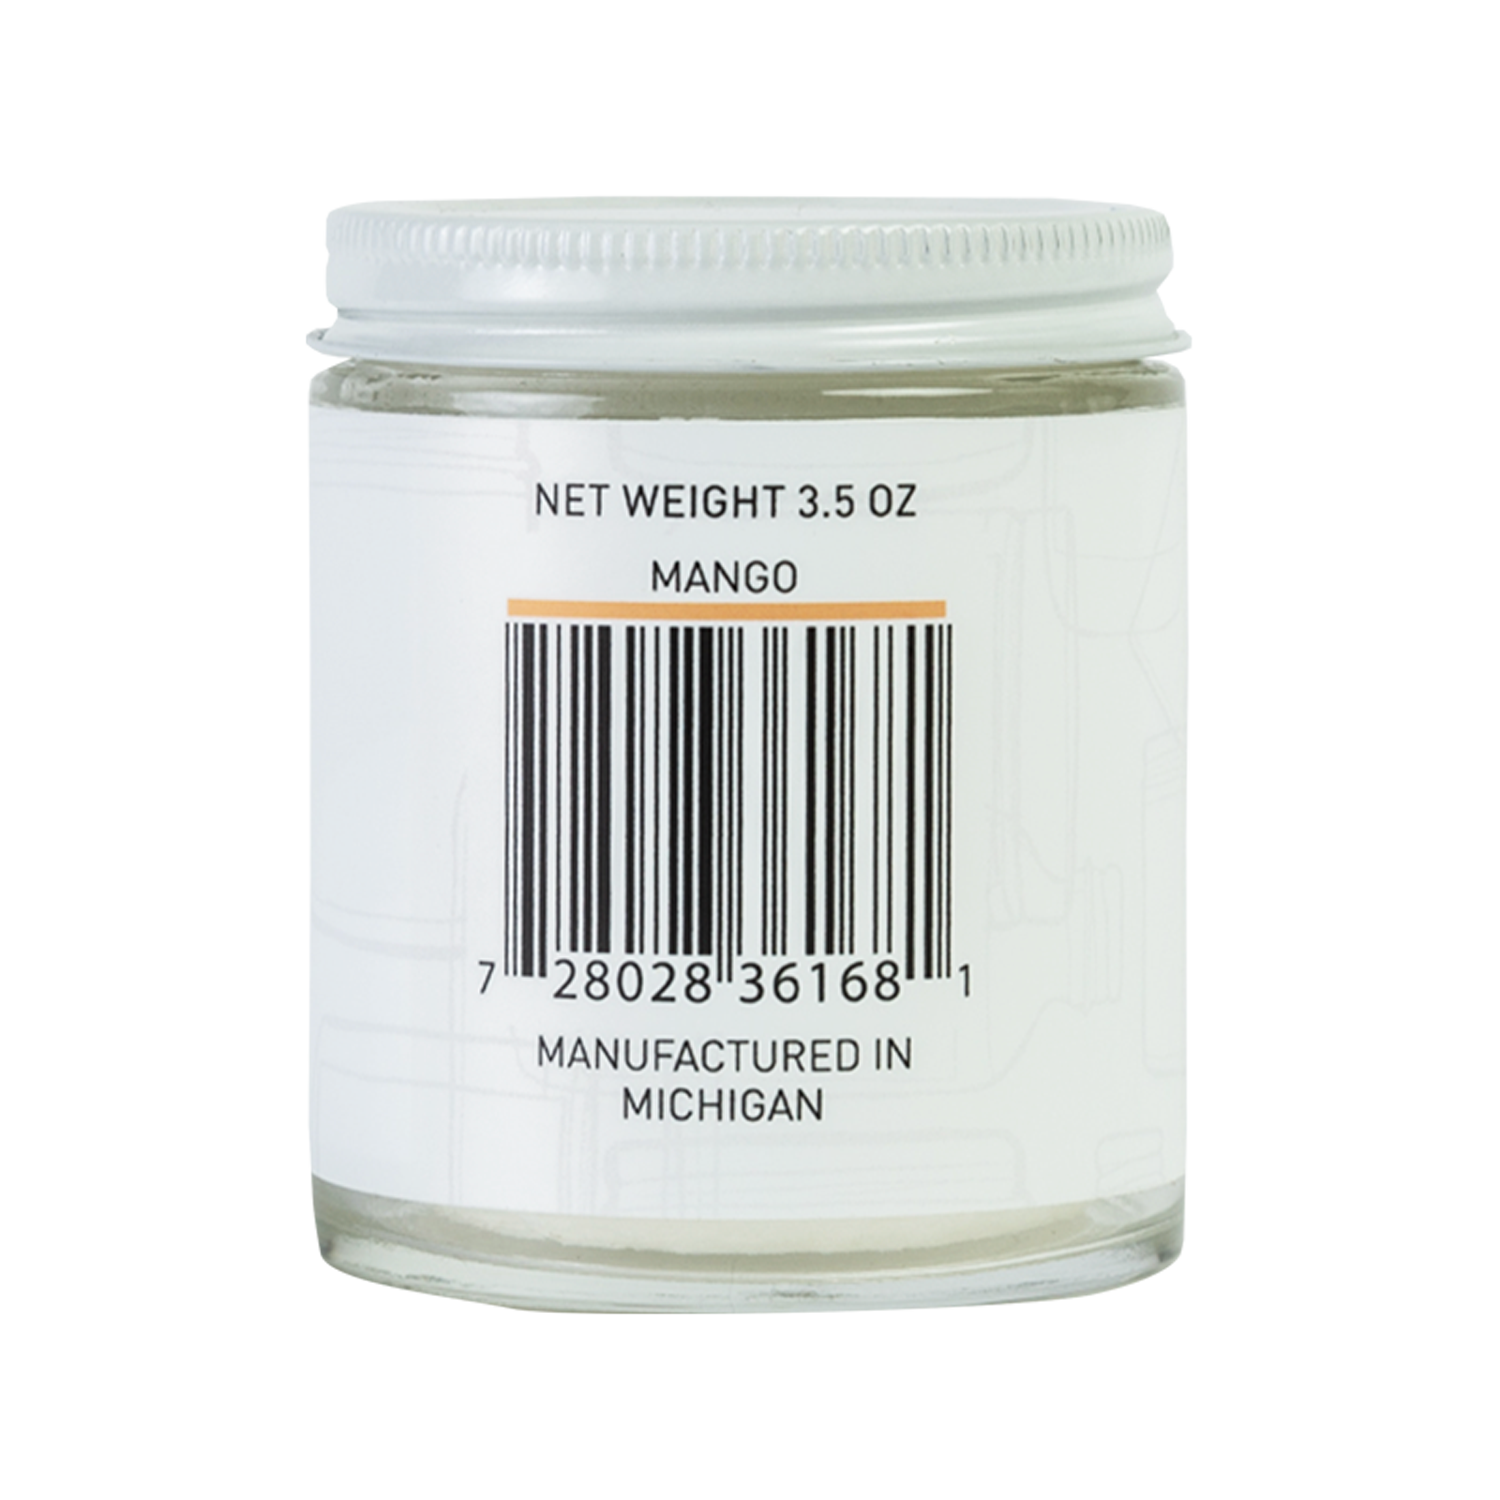 Mango Body Butter-Shipping in April